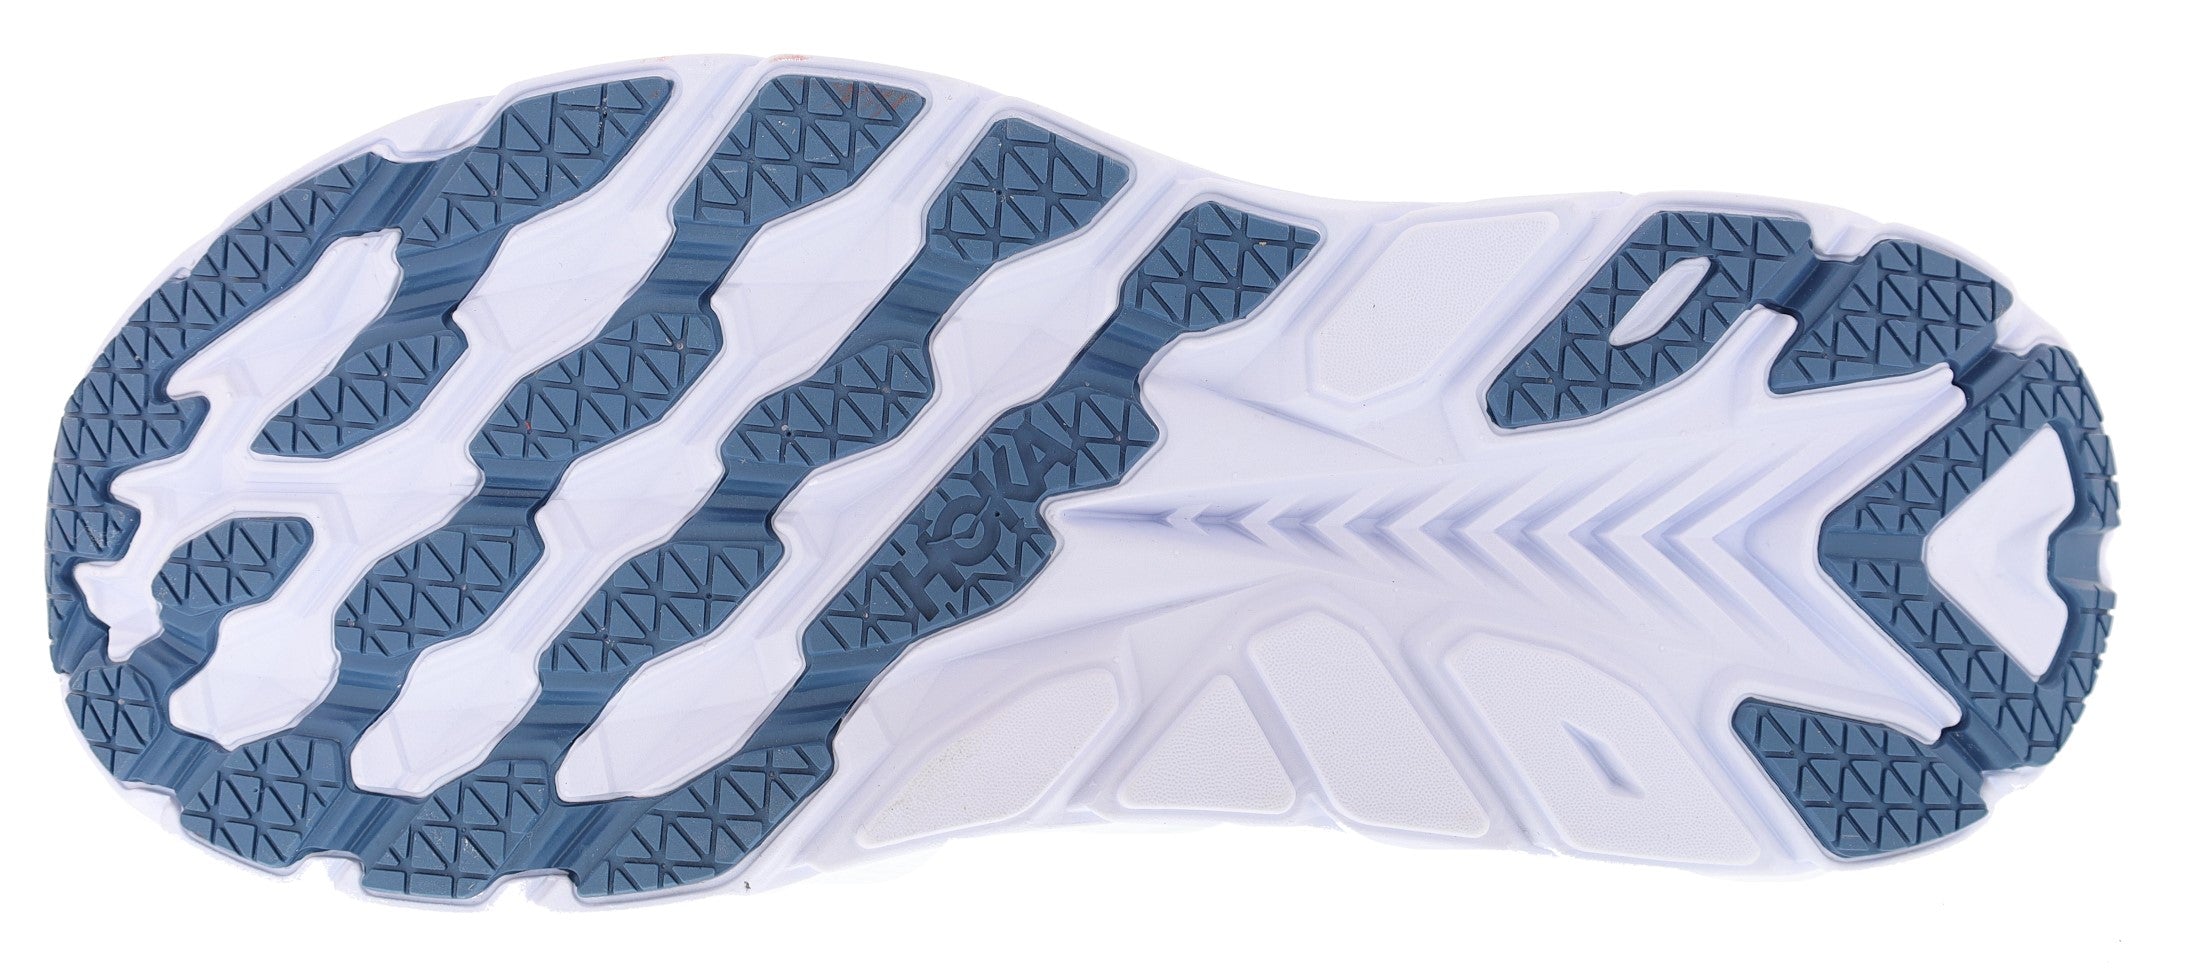 HOKA ONE ONE Men's Clifton 7 Running Shoes - White - Size 12